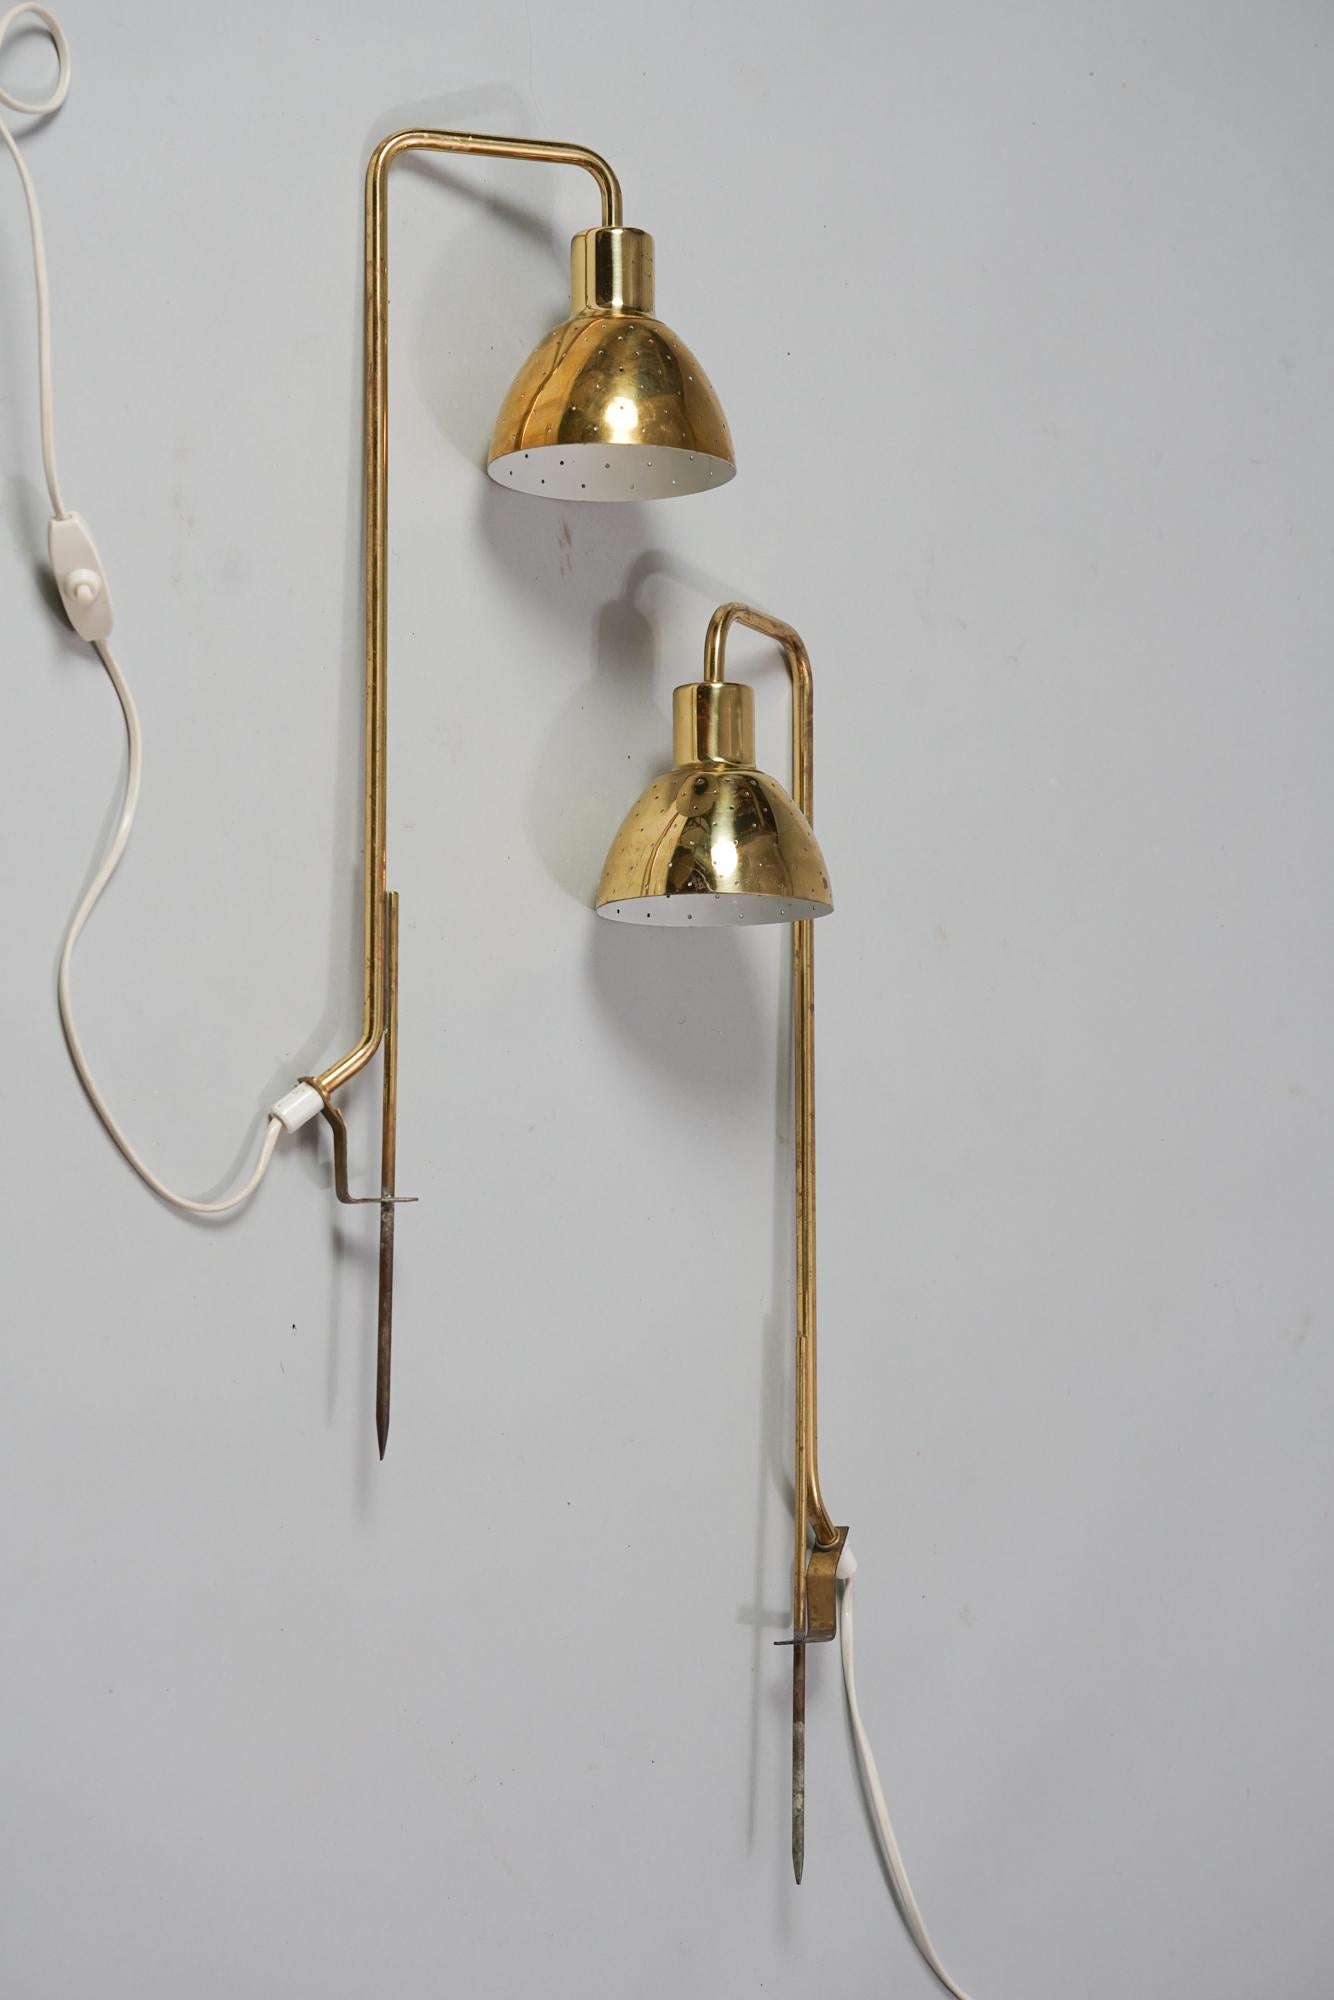 Set of two model Primula flower lamps by Hans-Agne Jacobsson forAB Markaryd from the 1960s. Brass. Good vintage condition, minor patina and wear consistent with age and use. The Flower lamps are sold as a set. 

Hans-Agne Jakobsson (1919-2009) was a